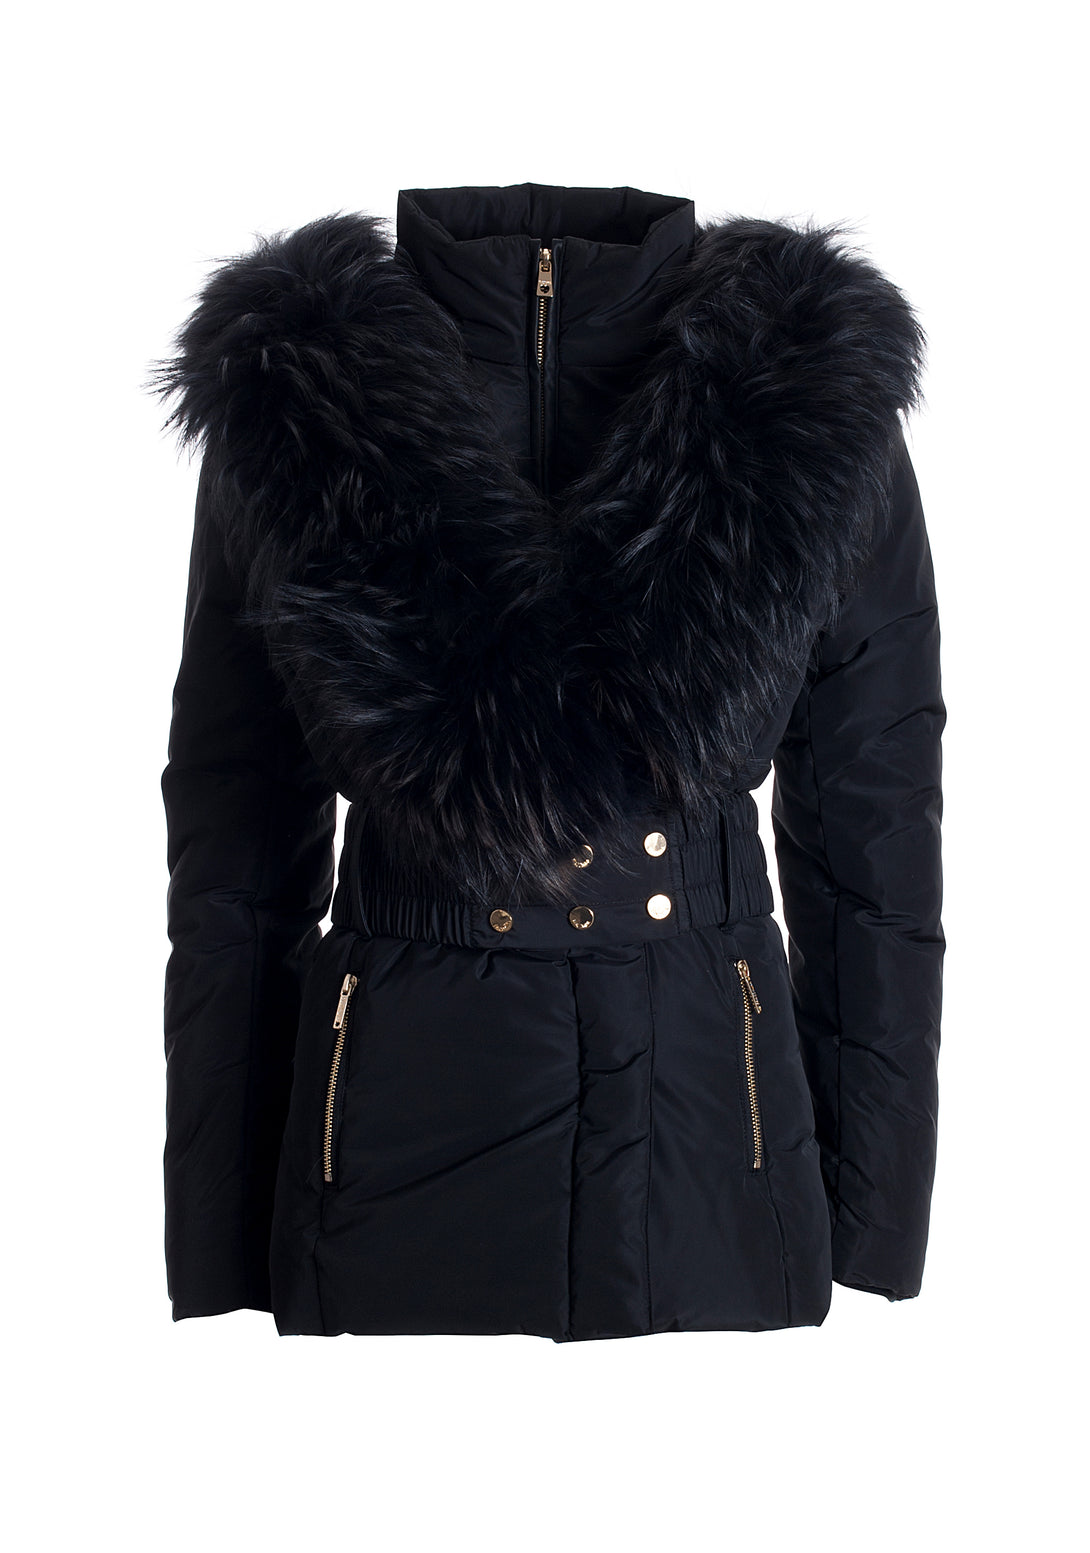 Padded jacket regular fit with racoon fur detail